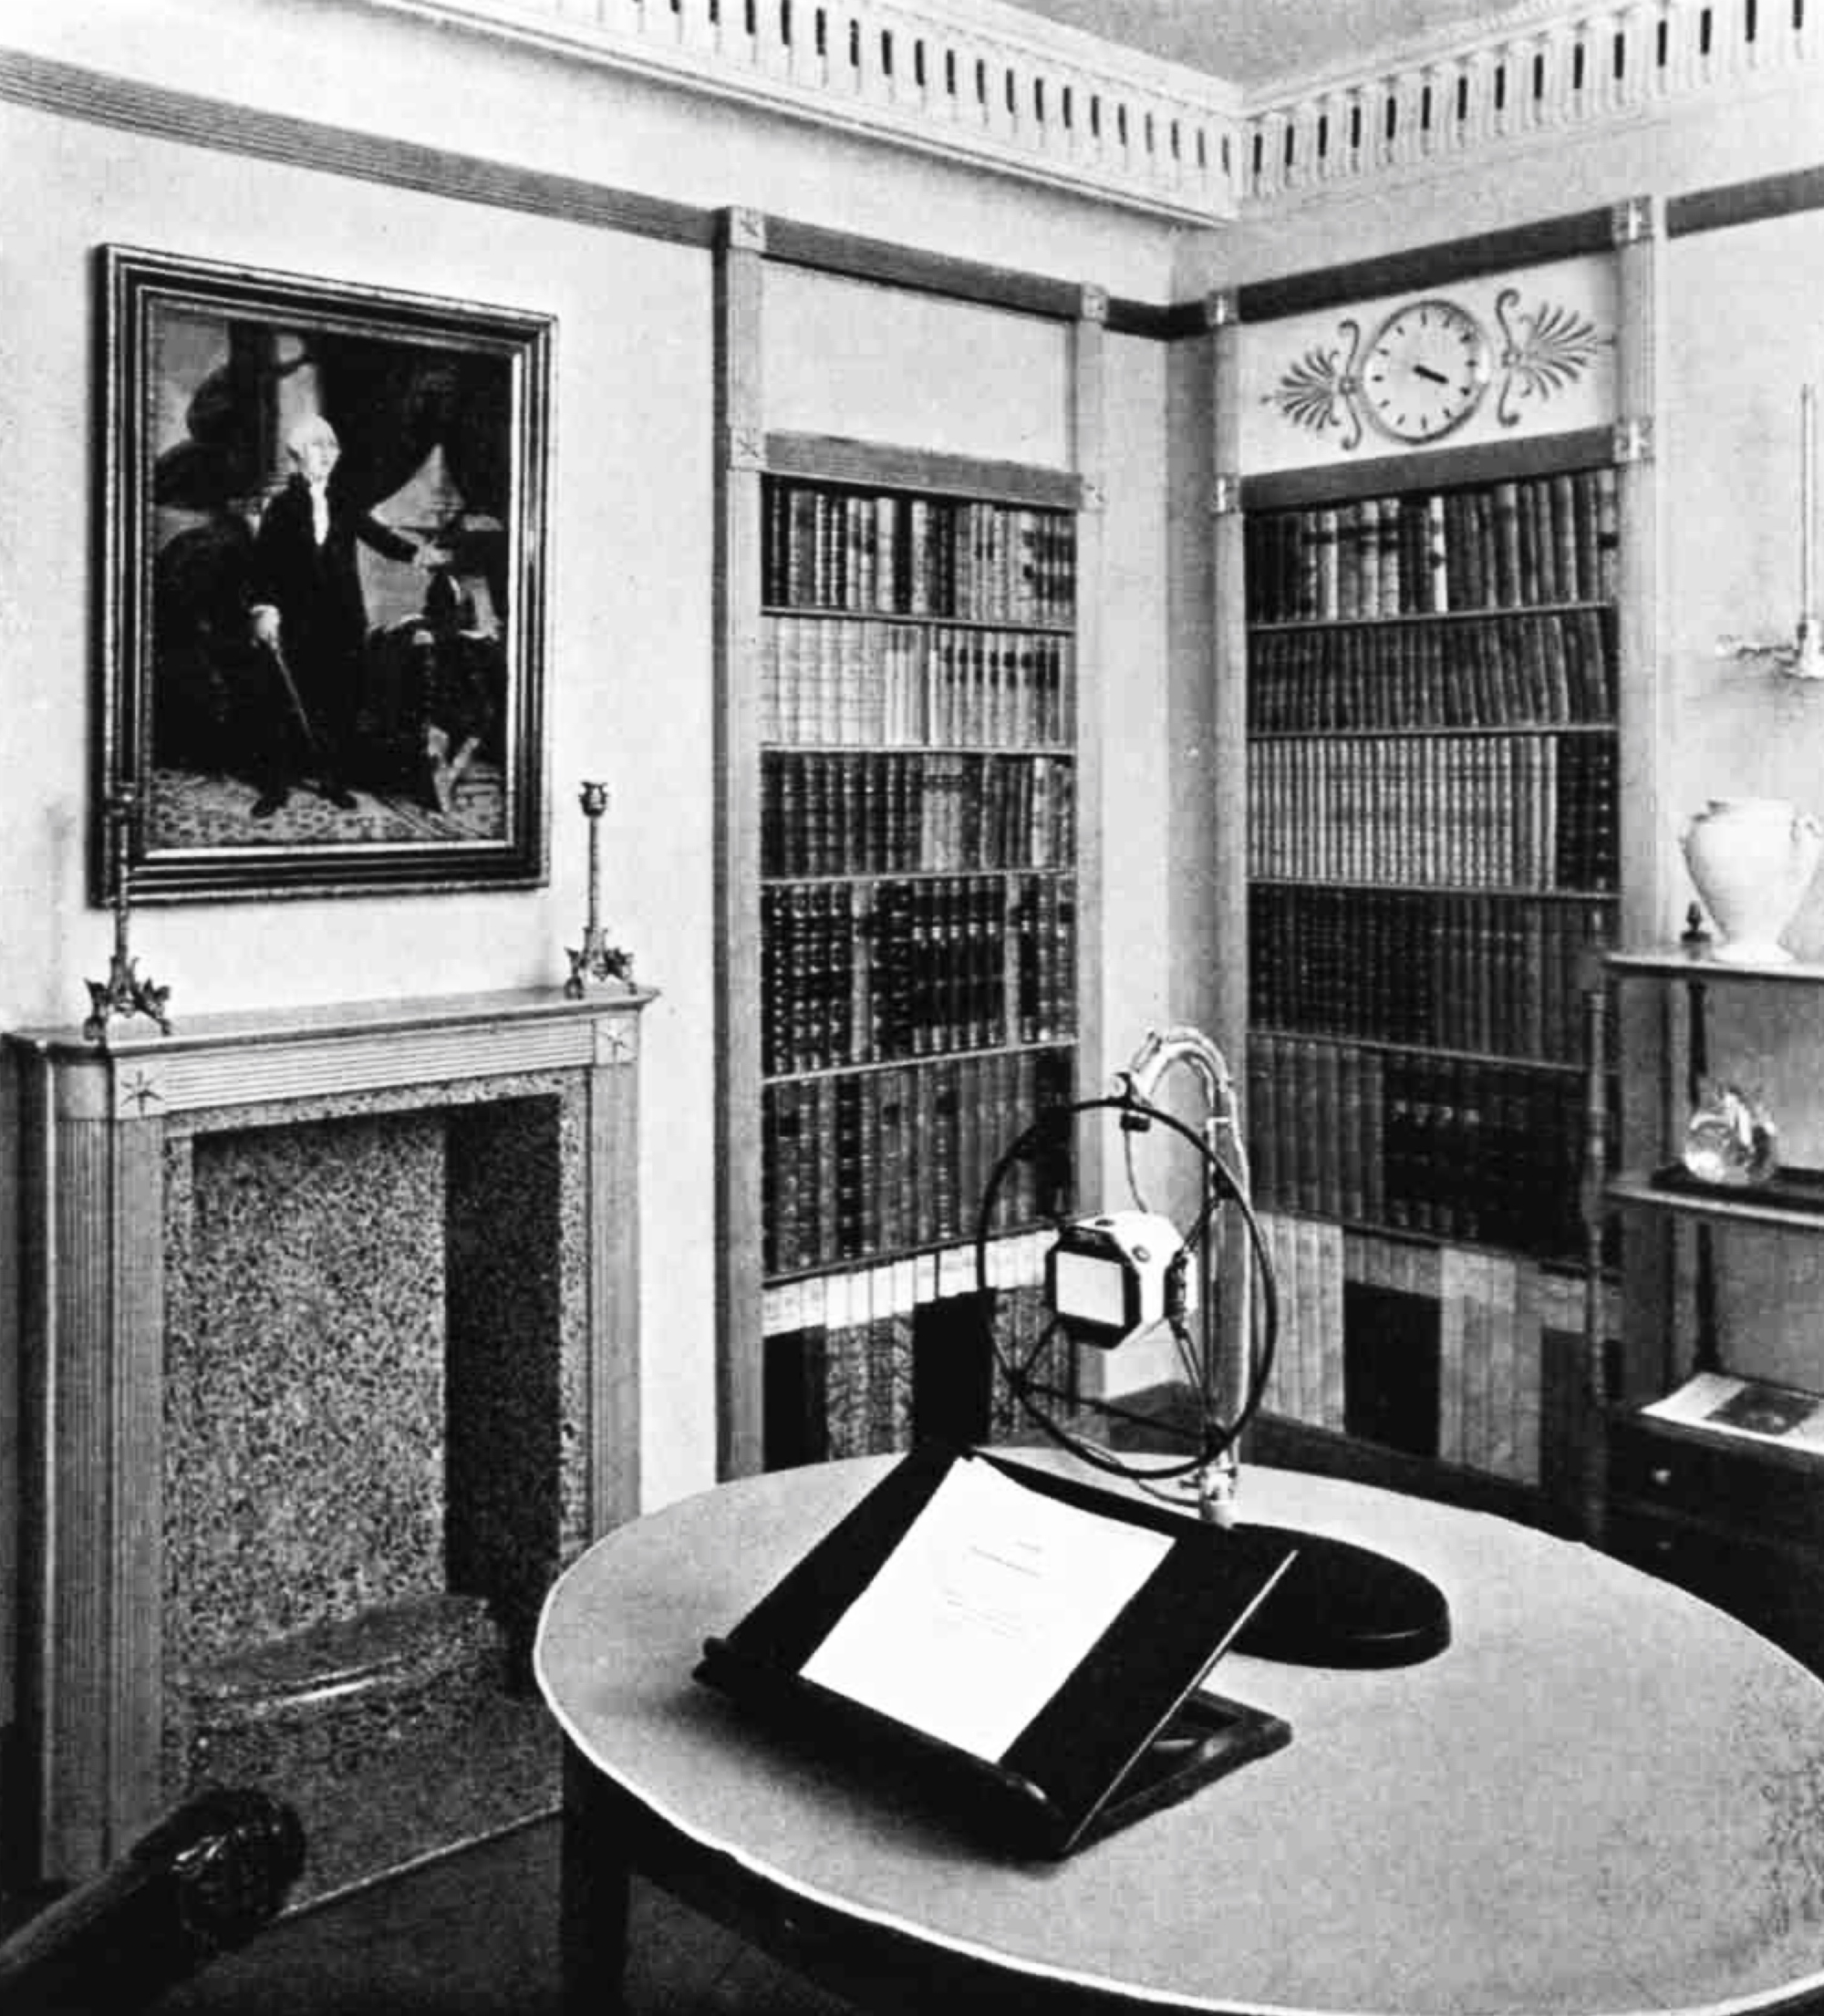 A room with a dummy fireplace, bookcases, ornaments and a round table with a microphone and a book stand